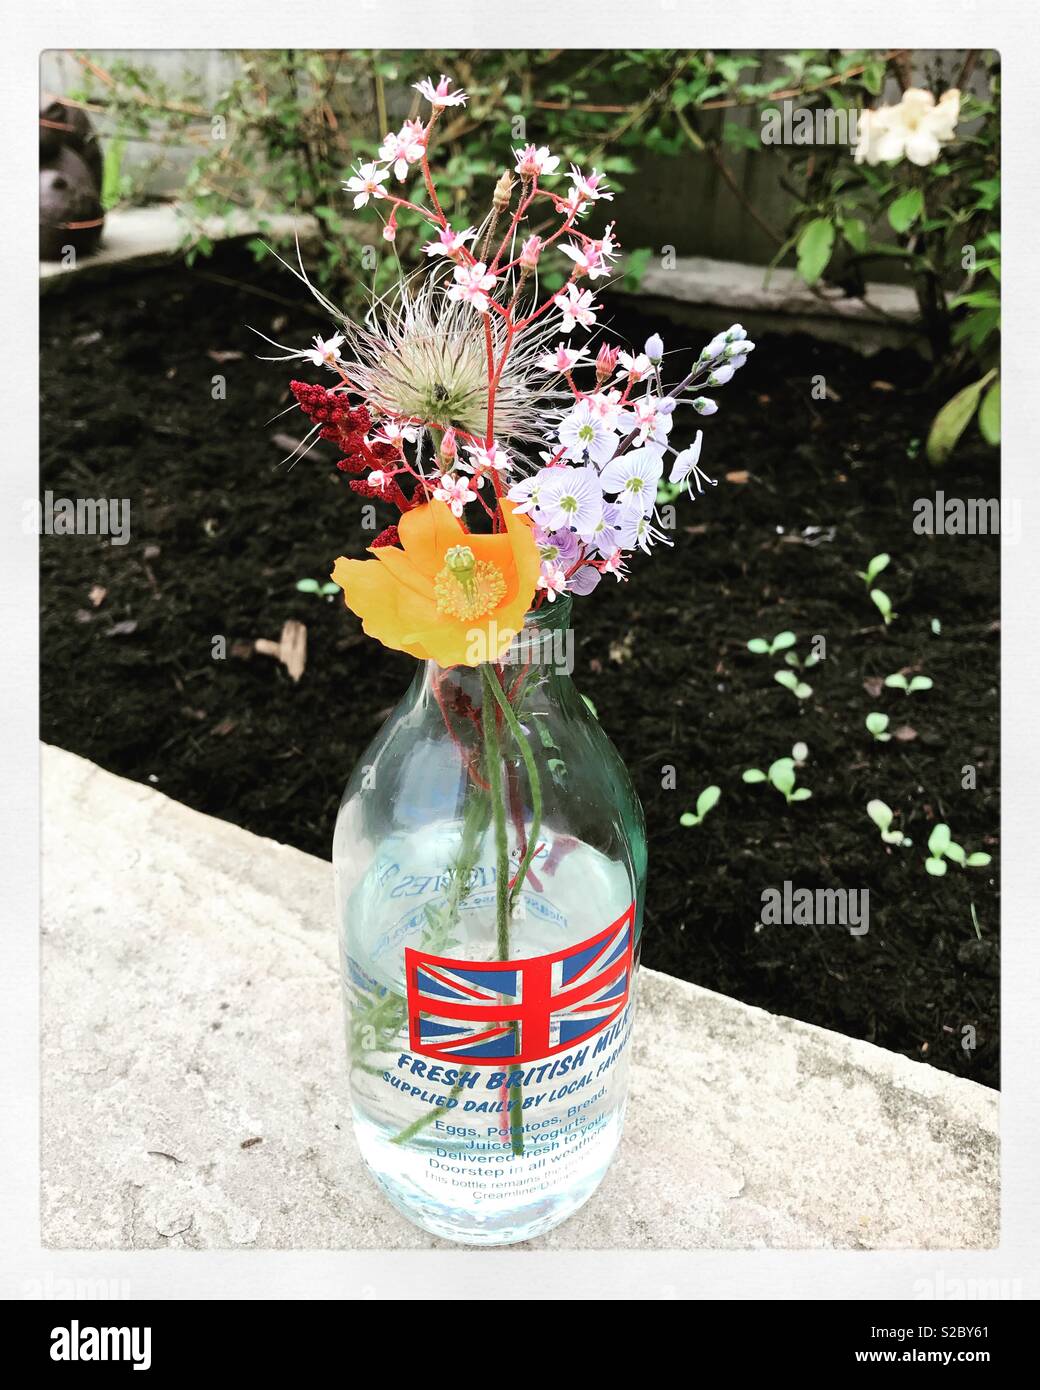 https://c8.alamy.com/comp/S2BY61/old-fashioned-milk-bottle-with-wild-flower-bouquet-S2BY61.jpg